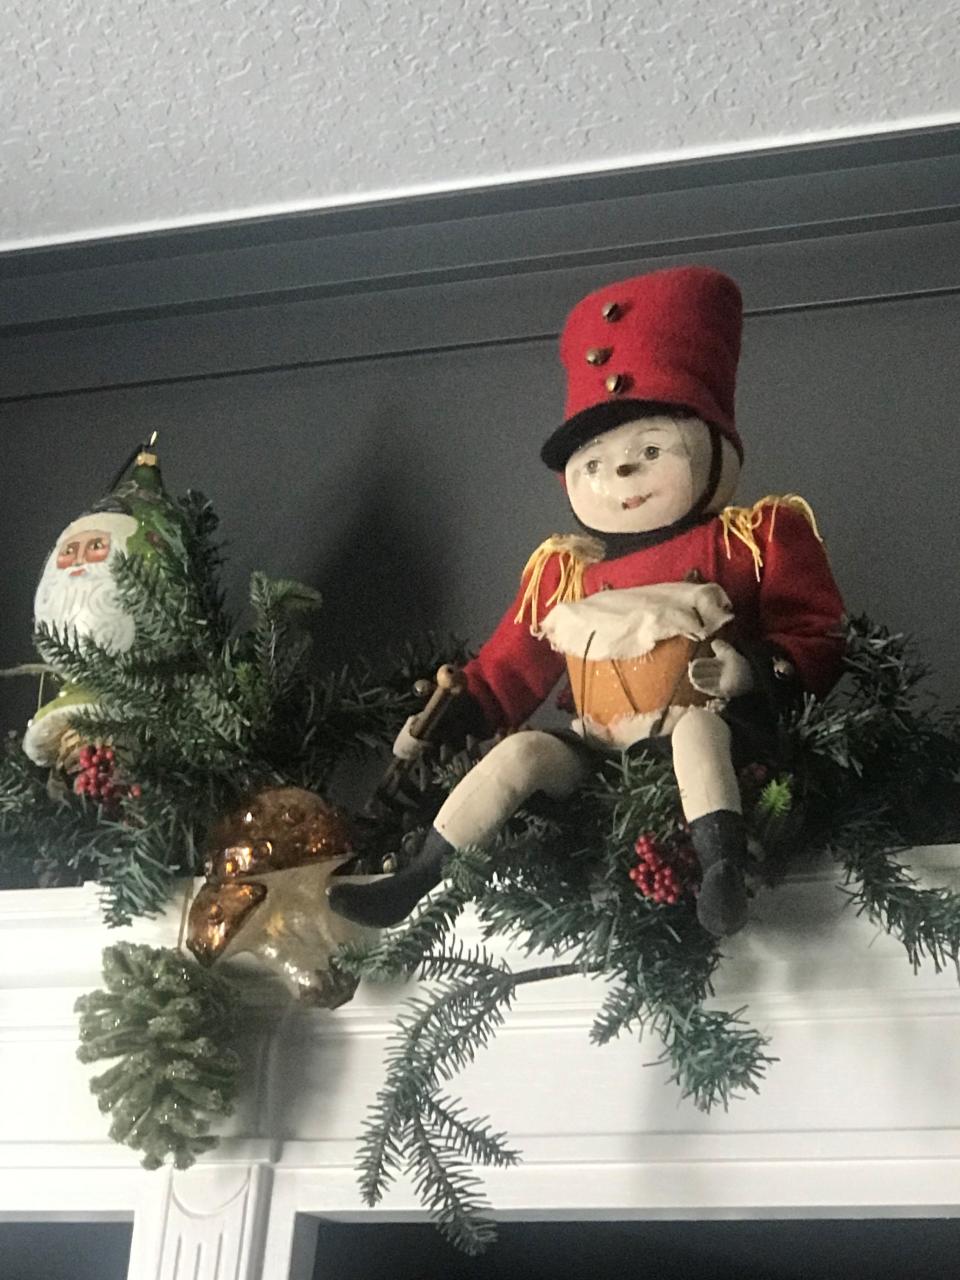 Cynthia Wall's home, decorated for the holidays, will be one of the stops on the Spade and Trowel Garden Club's Christmas home tour on Wed., Nov. 15.